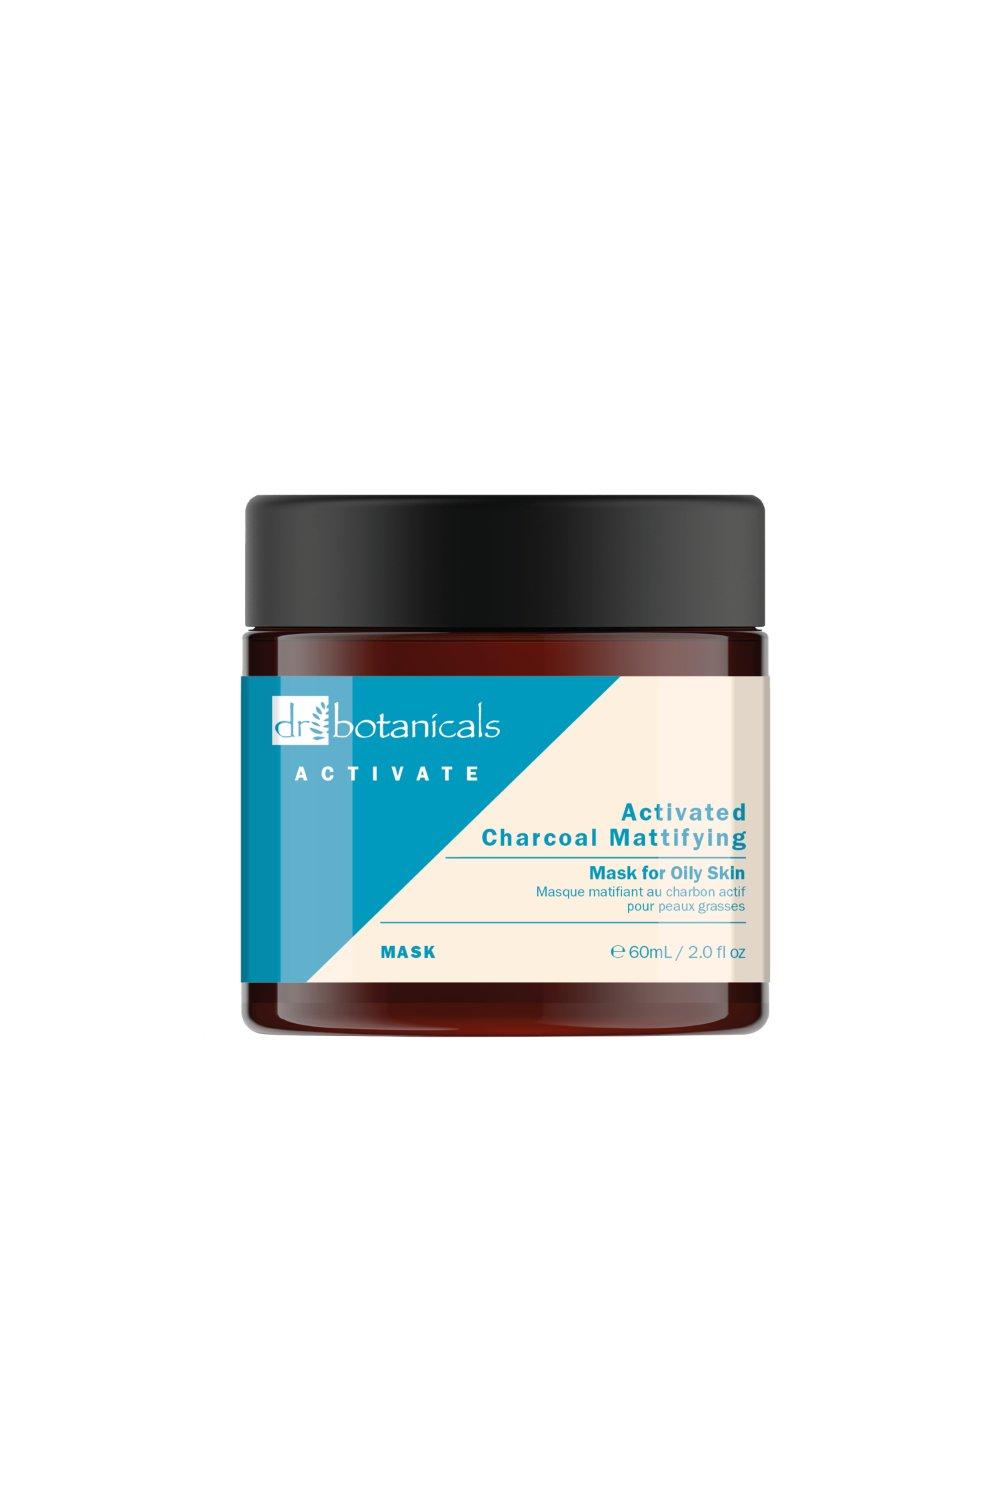 Activated Charcoal Mattifying Mask for Oily Skin 60ml